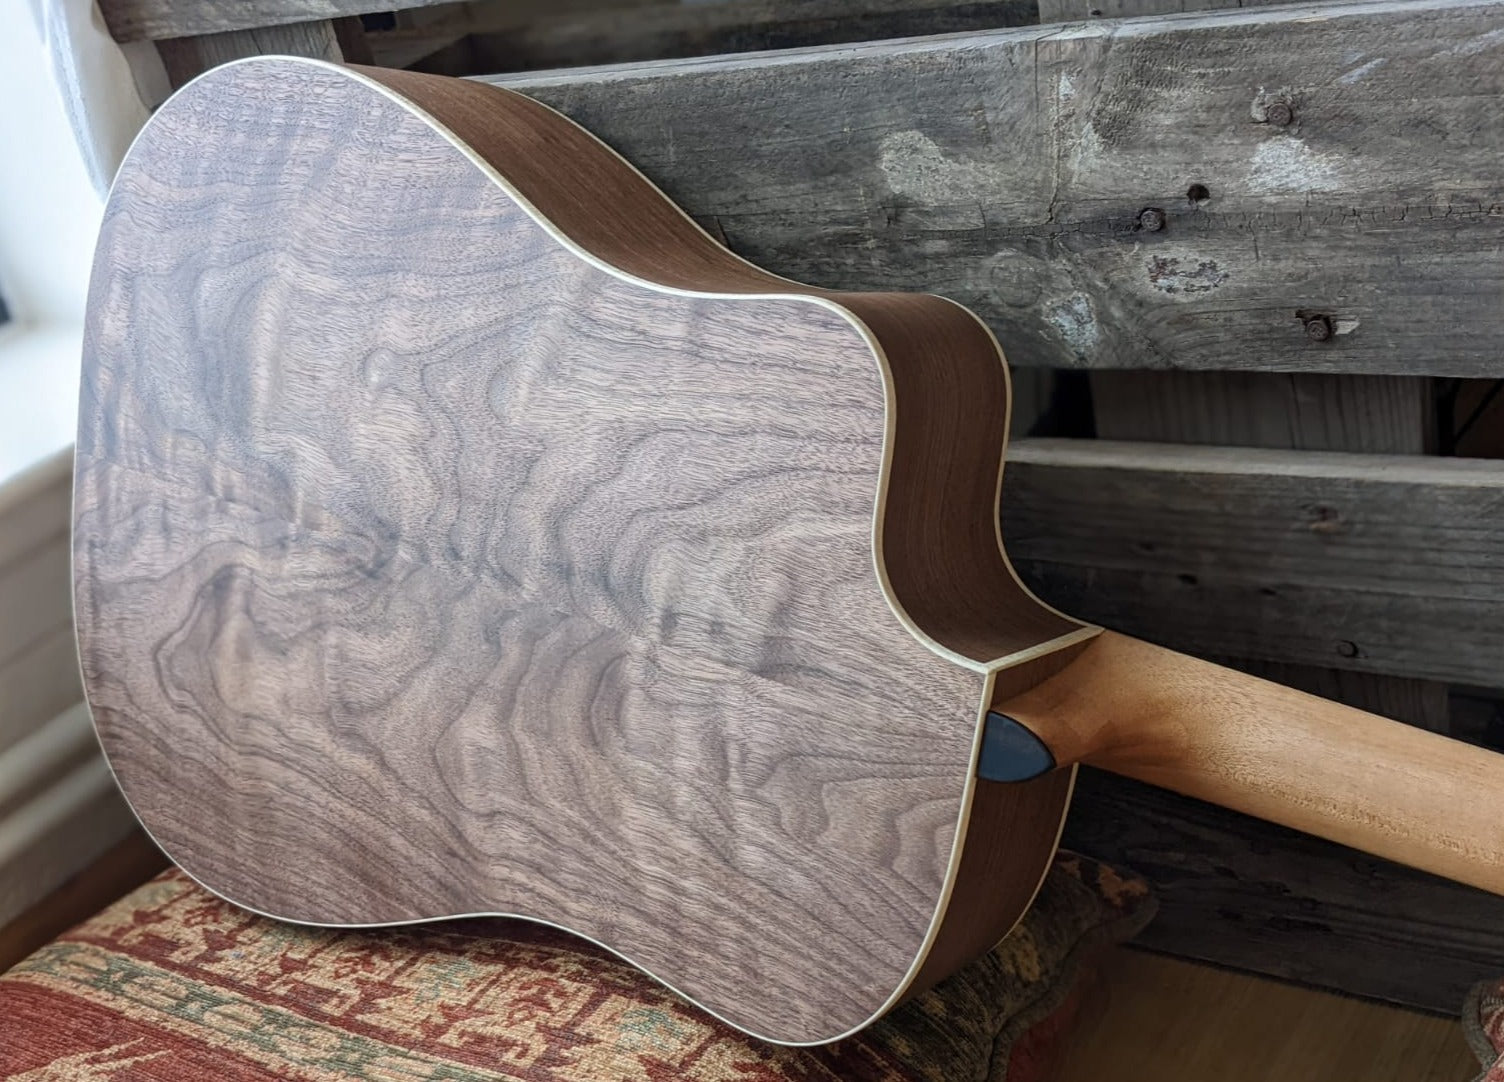 Dowina Walnut (SOL) Dreadnought Cutaway, Acoustic Guitar for sale at Richards Guitars.